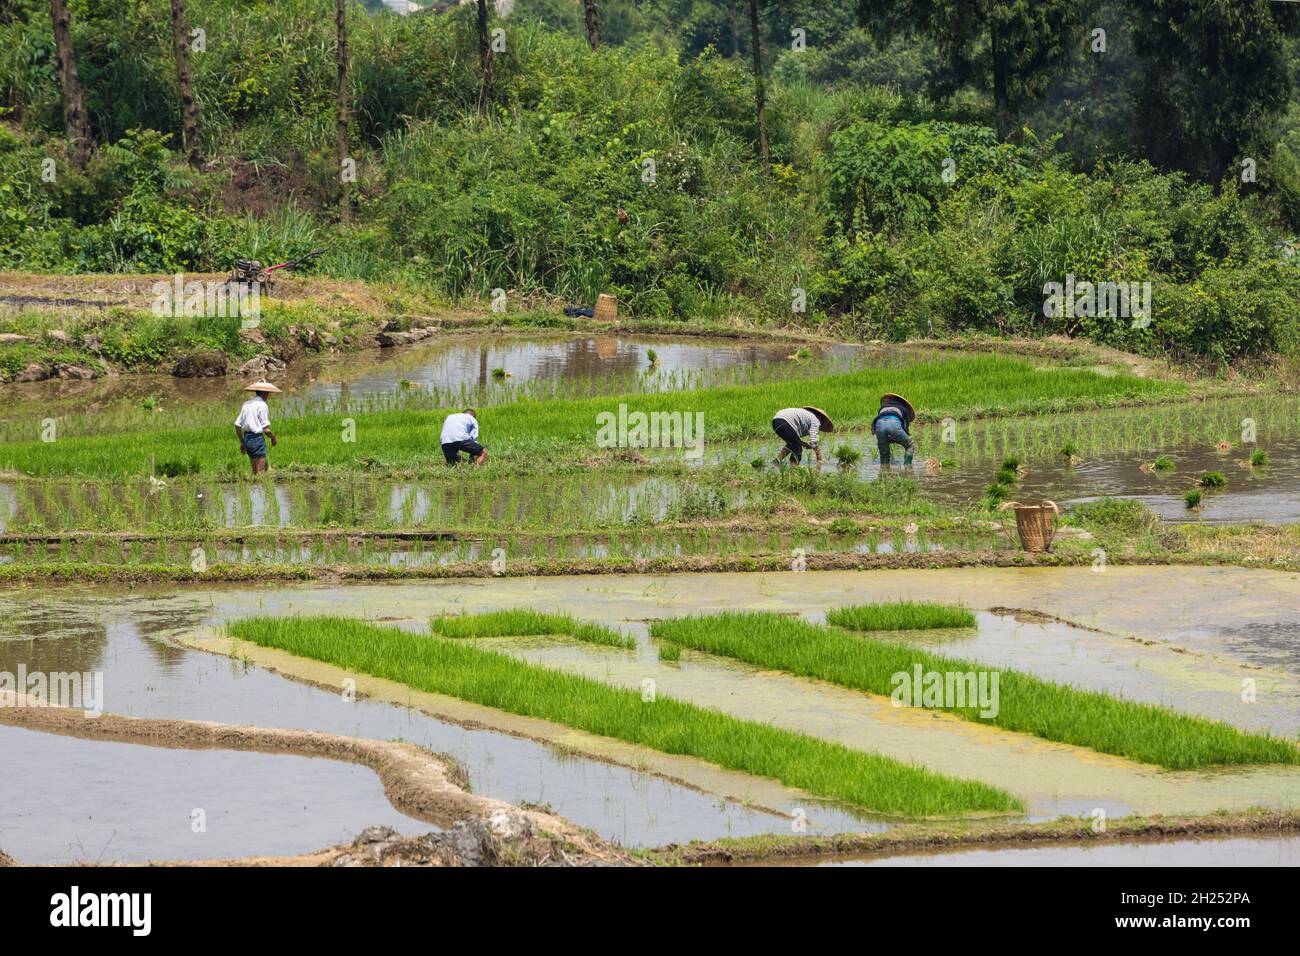 Farmers plant rice in a flooded rice paddy in China. Stock Photo